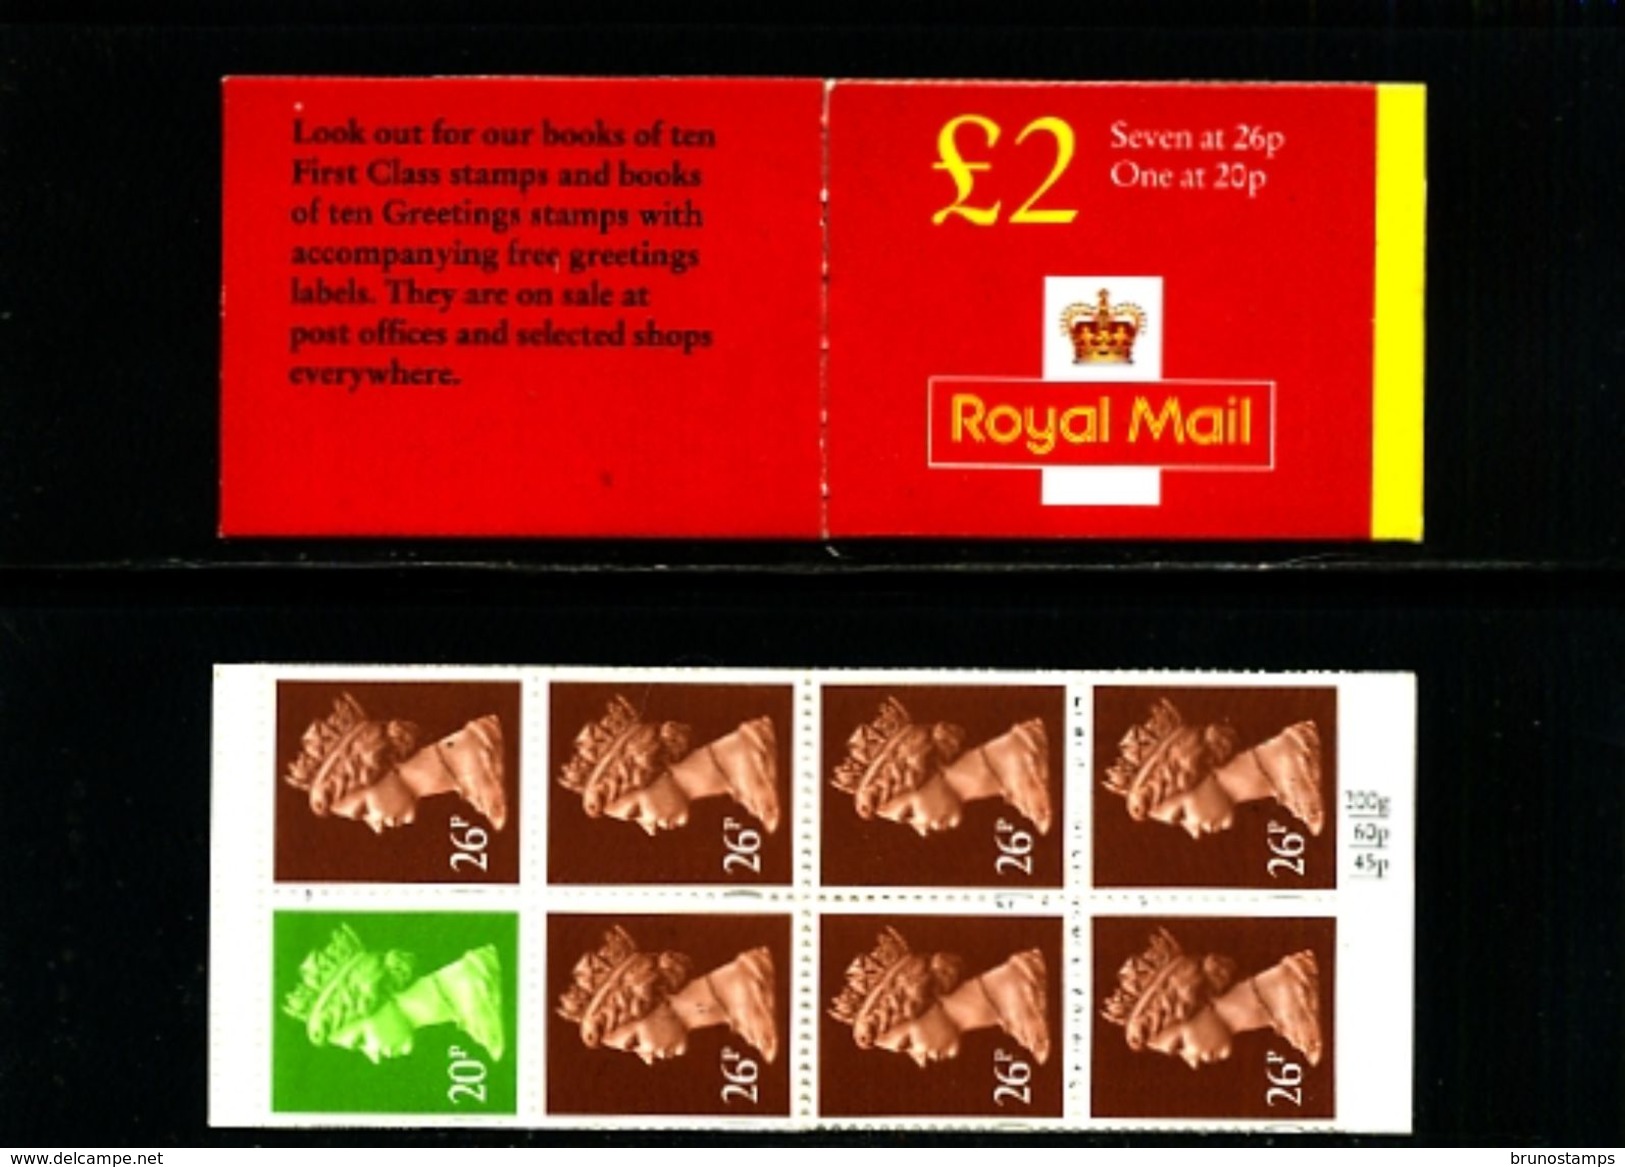 GREAT BRITAIN - 1998  £ 2  BOOKLET  NEW STYLE  20p/26p  (NO TABLE)  MINT NH  SG FW 9b - Booklets